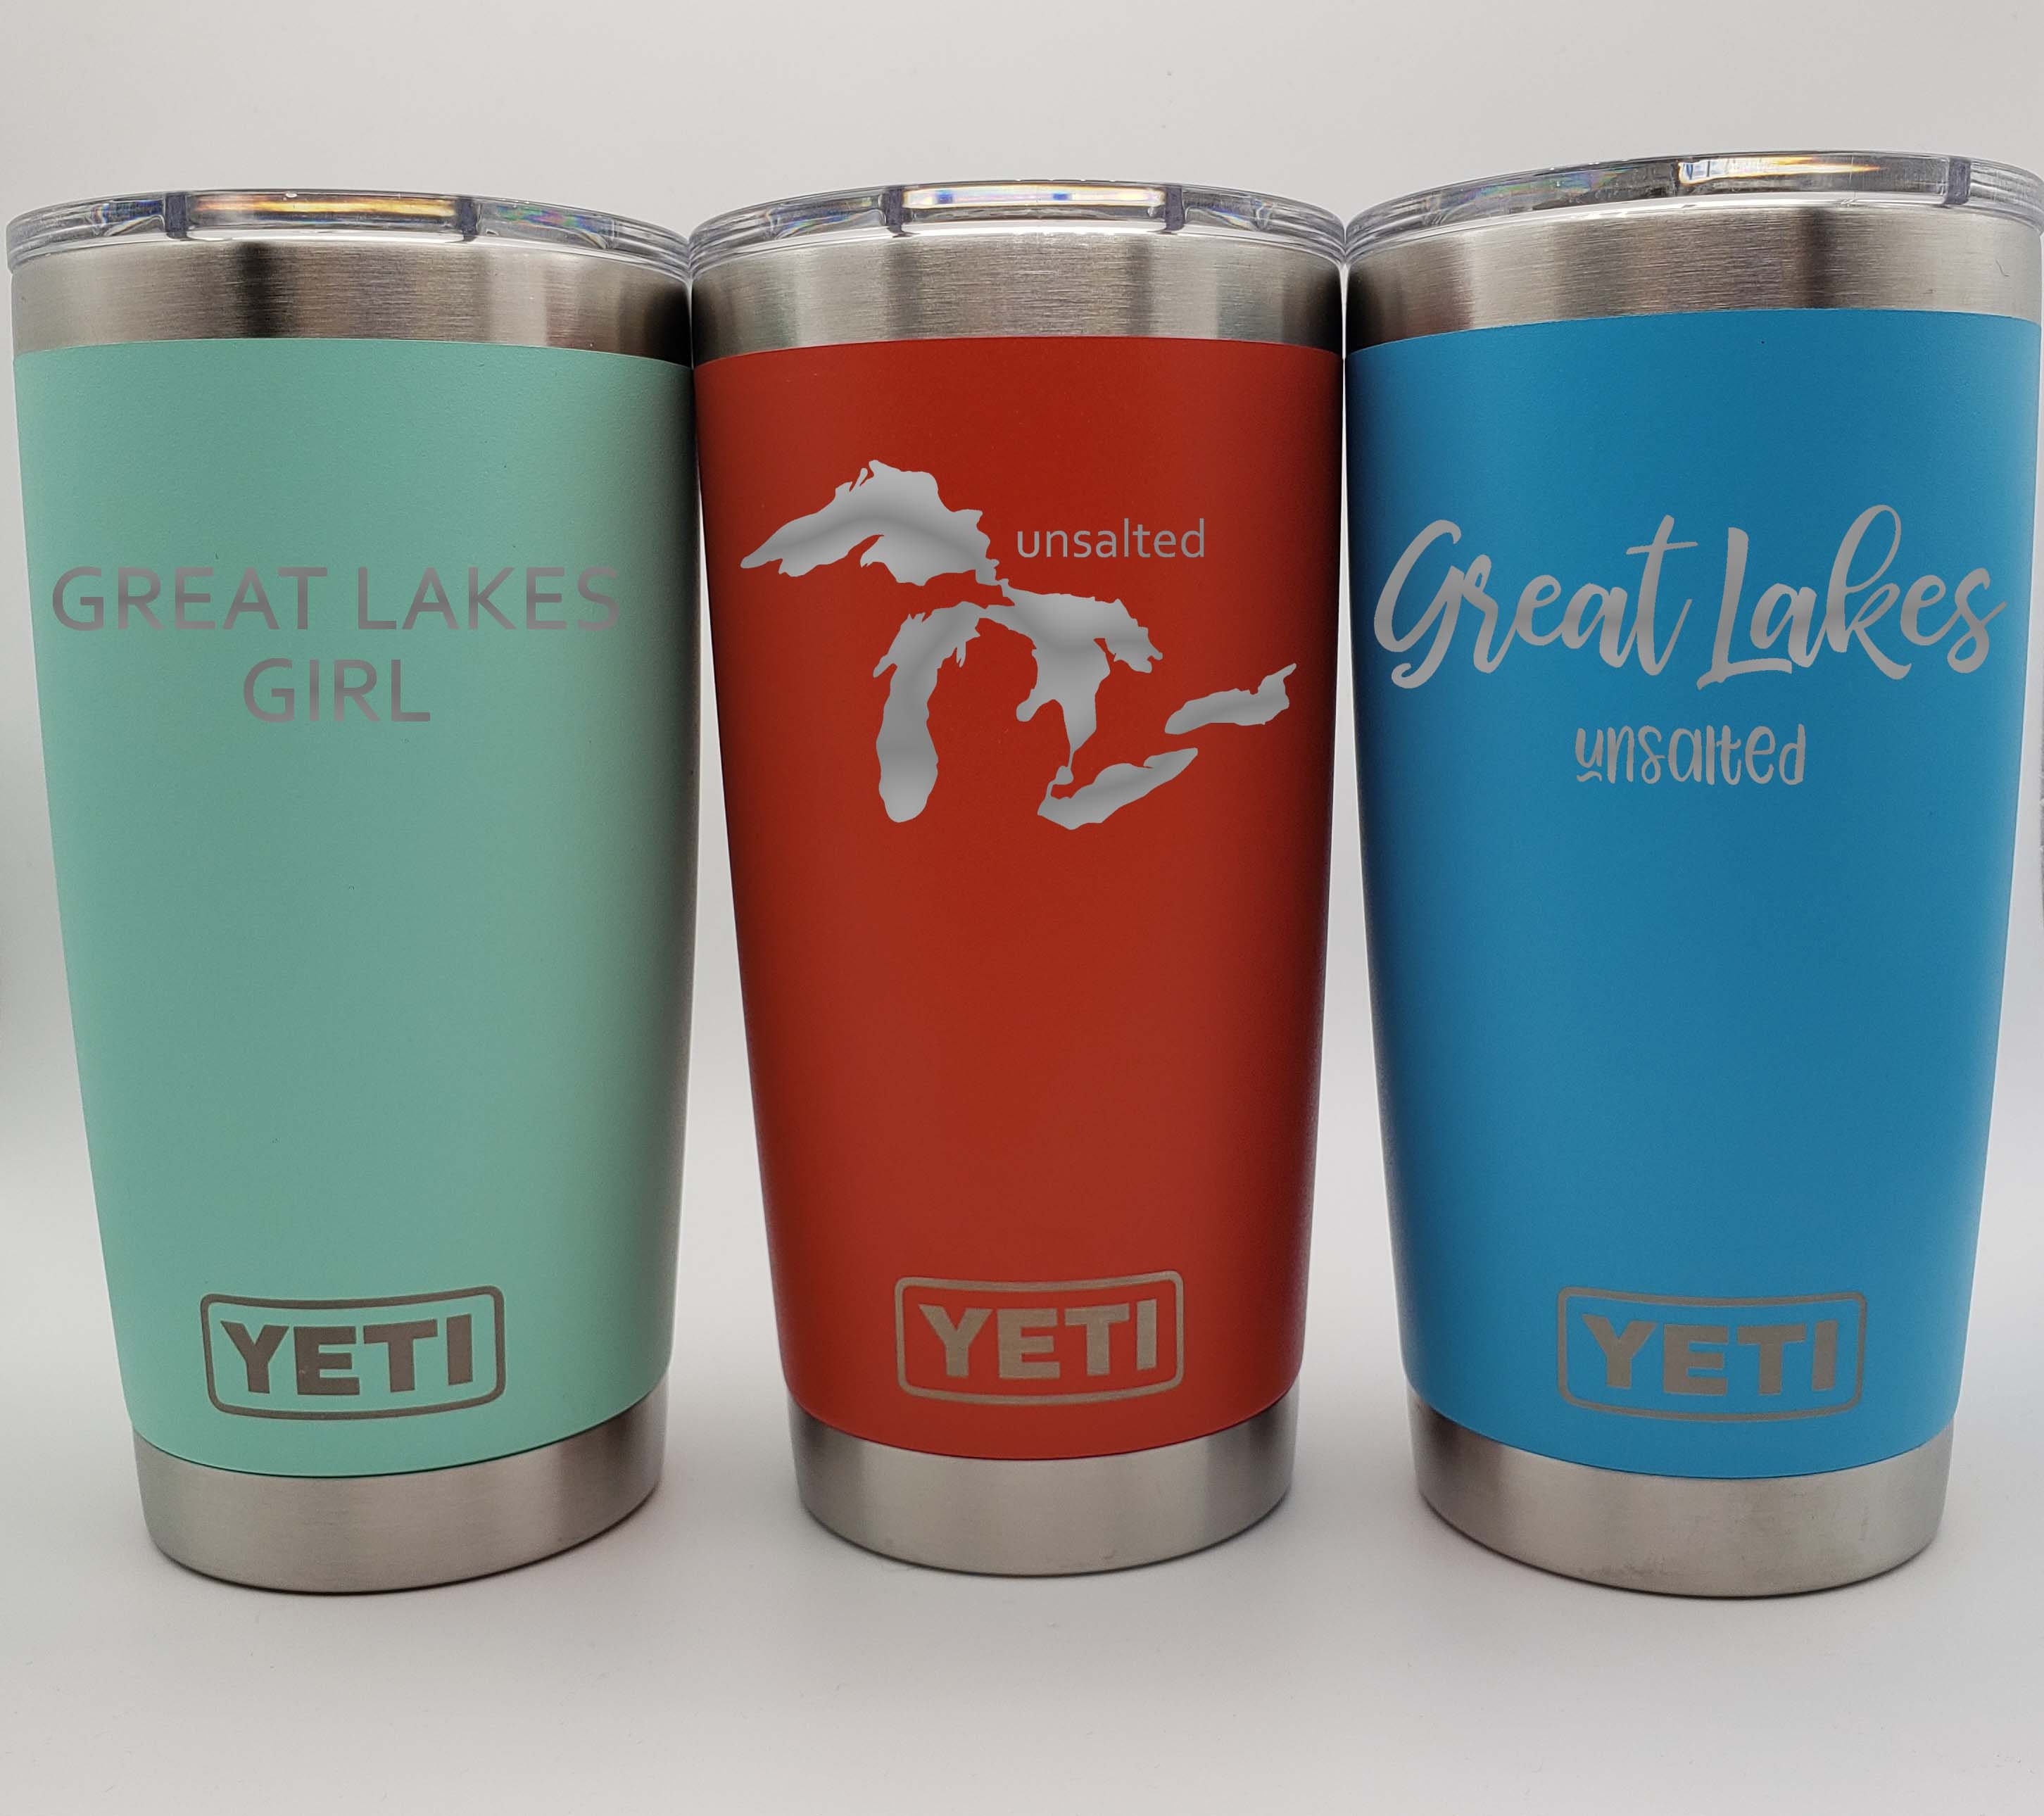 Michigan Yeti Carrying The U.P. – Warrior Flags And Engraving